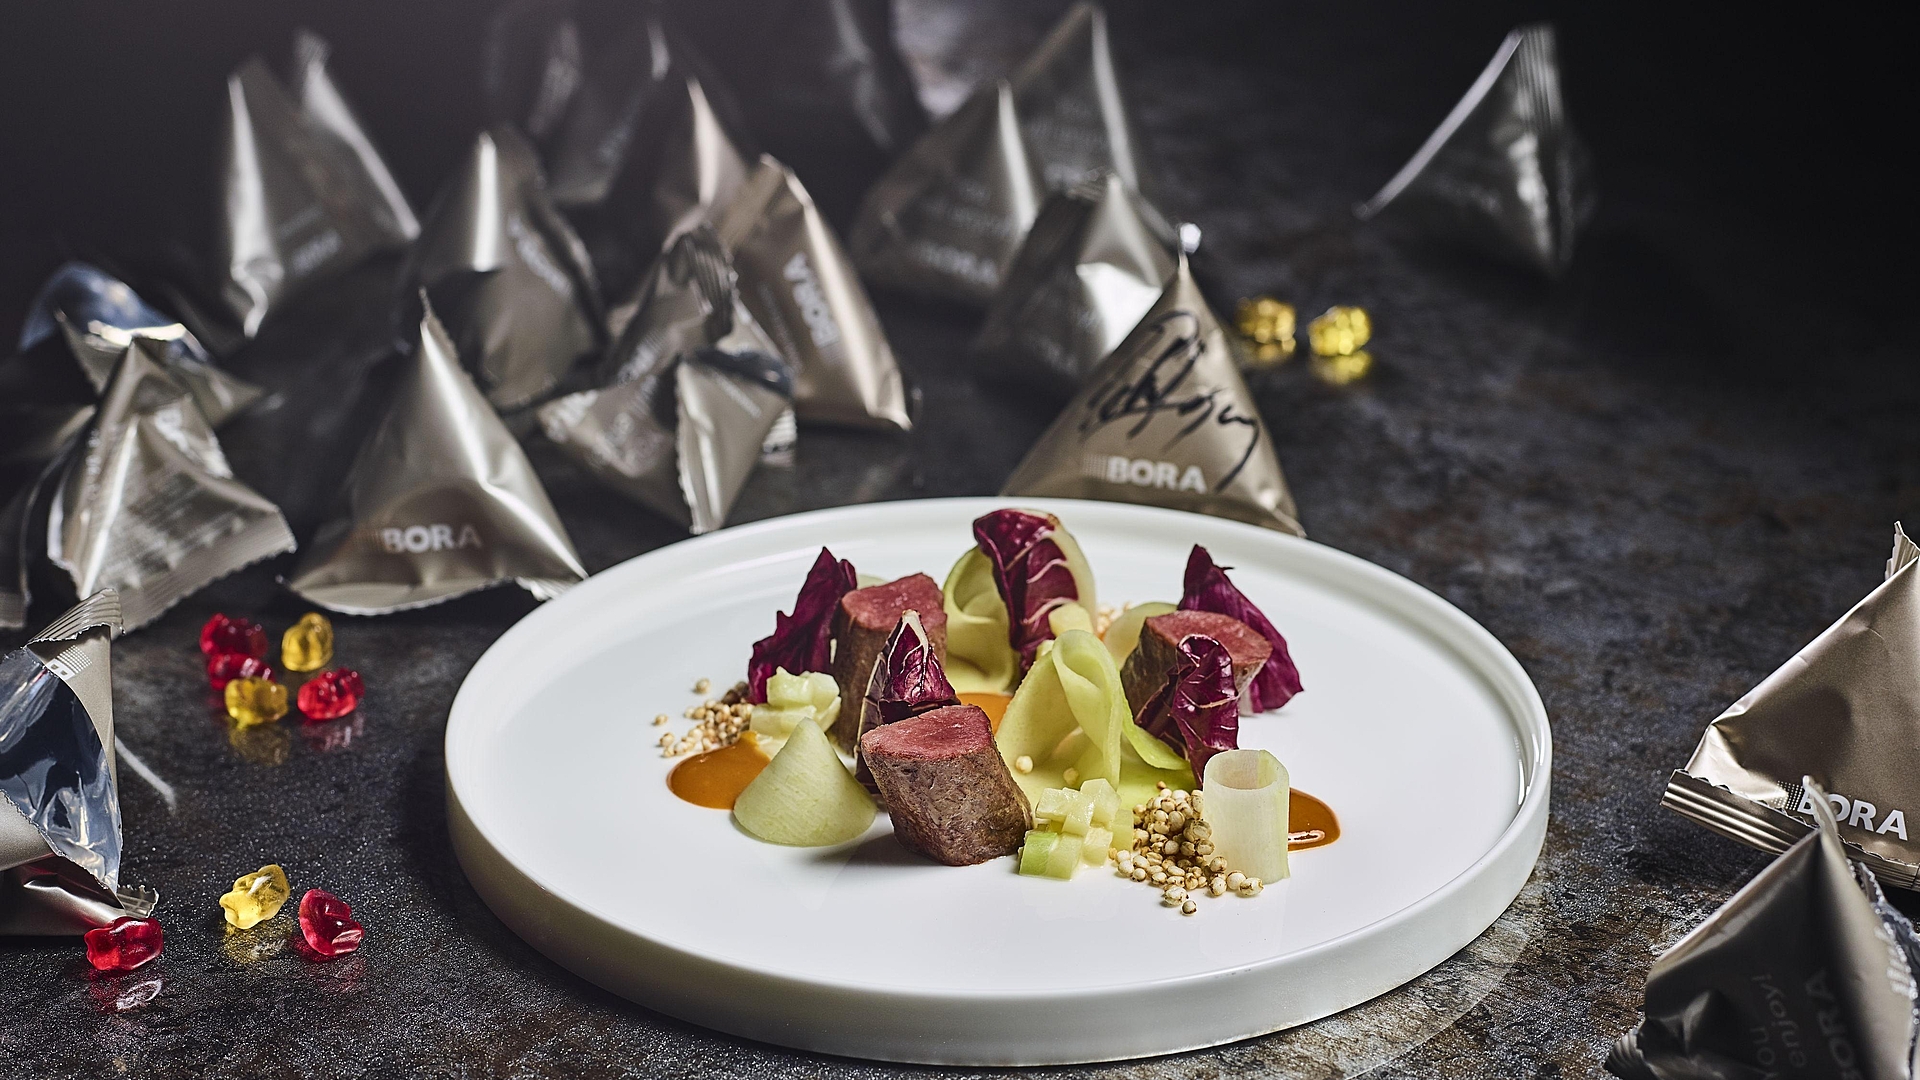 Venison fillet with kohlrabi and sea buckthorn